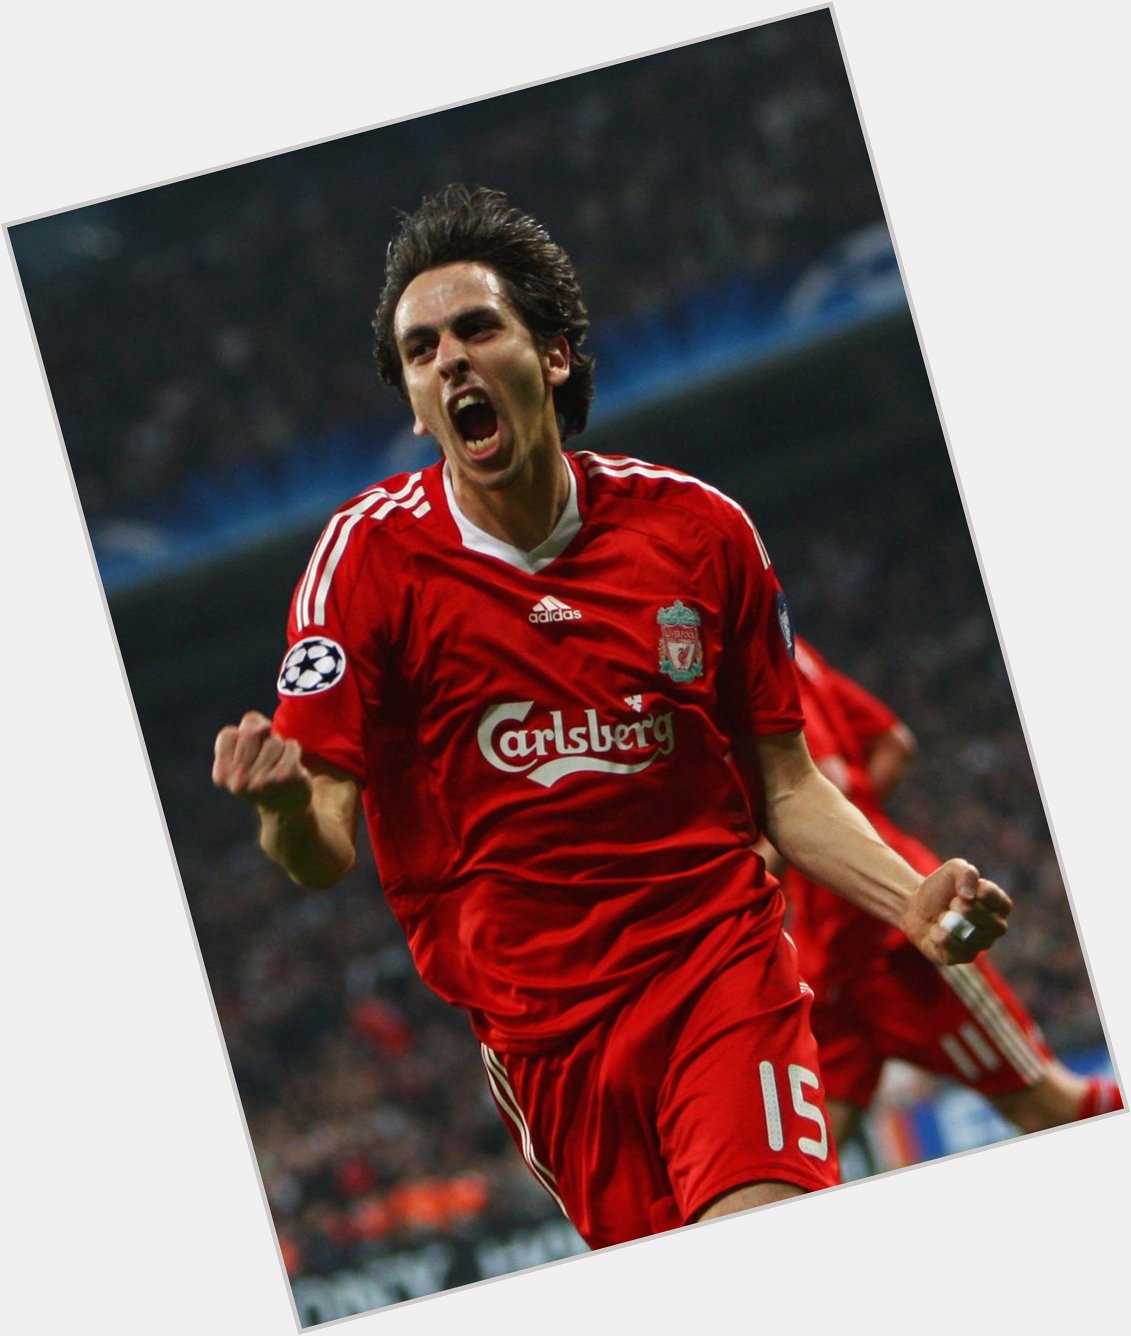 Happy Birthday to Ex-Red, Yossi Benayoun! A very underrated player! 